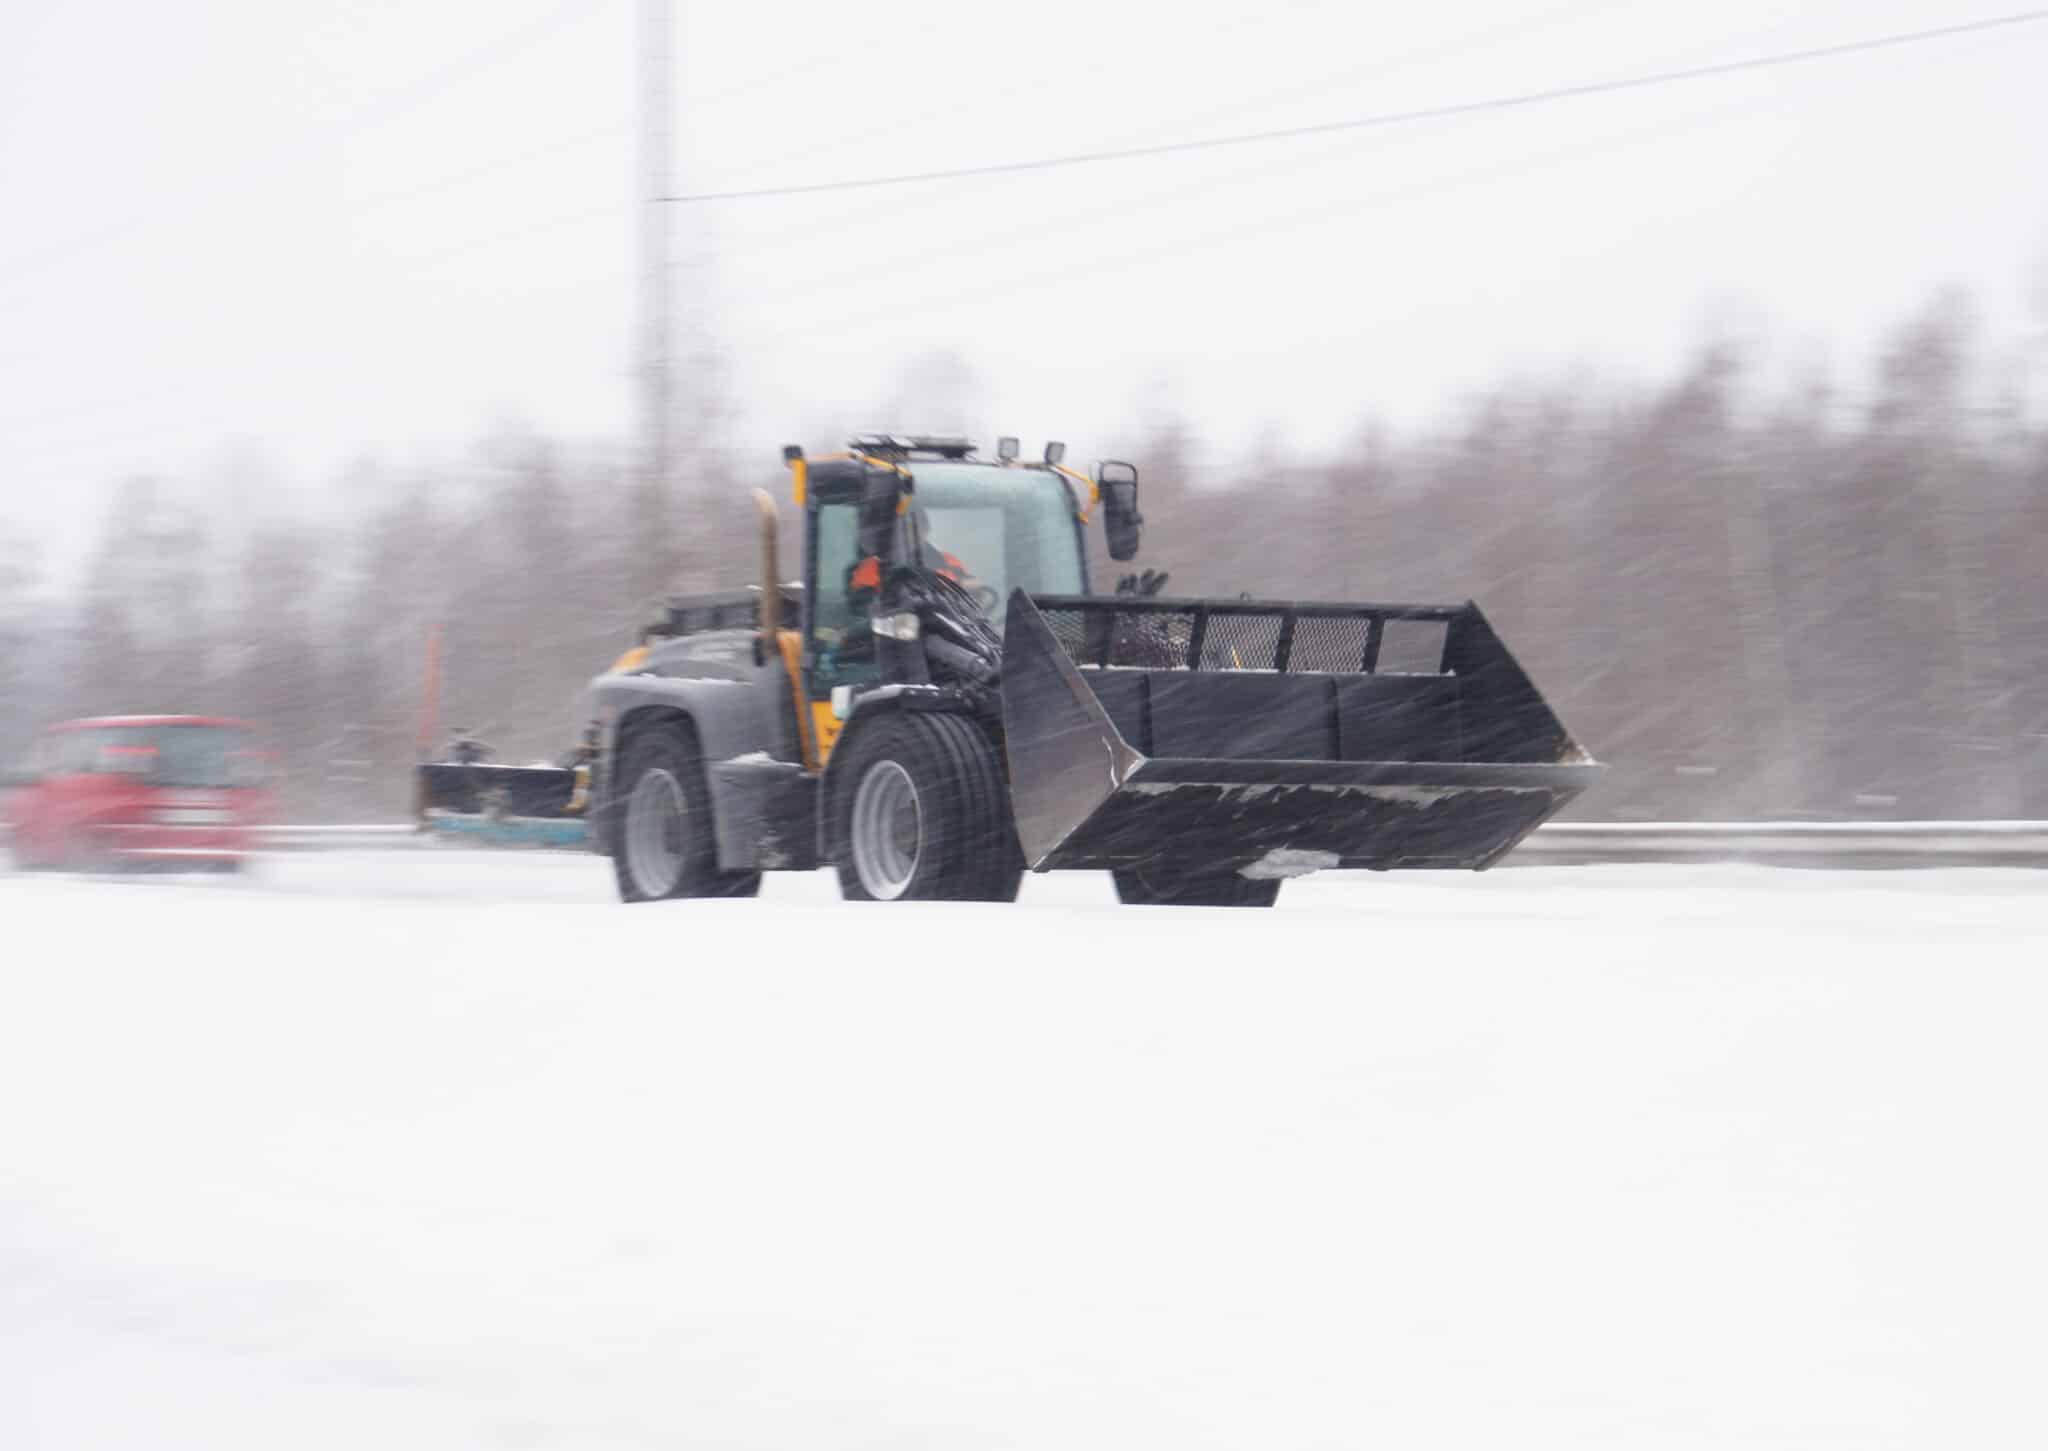 Hämeenlinna, Finland January 21st 2021 : Bulldozer moving to next site in a heavy snowstorm